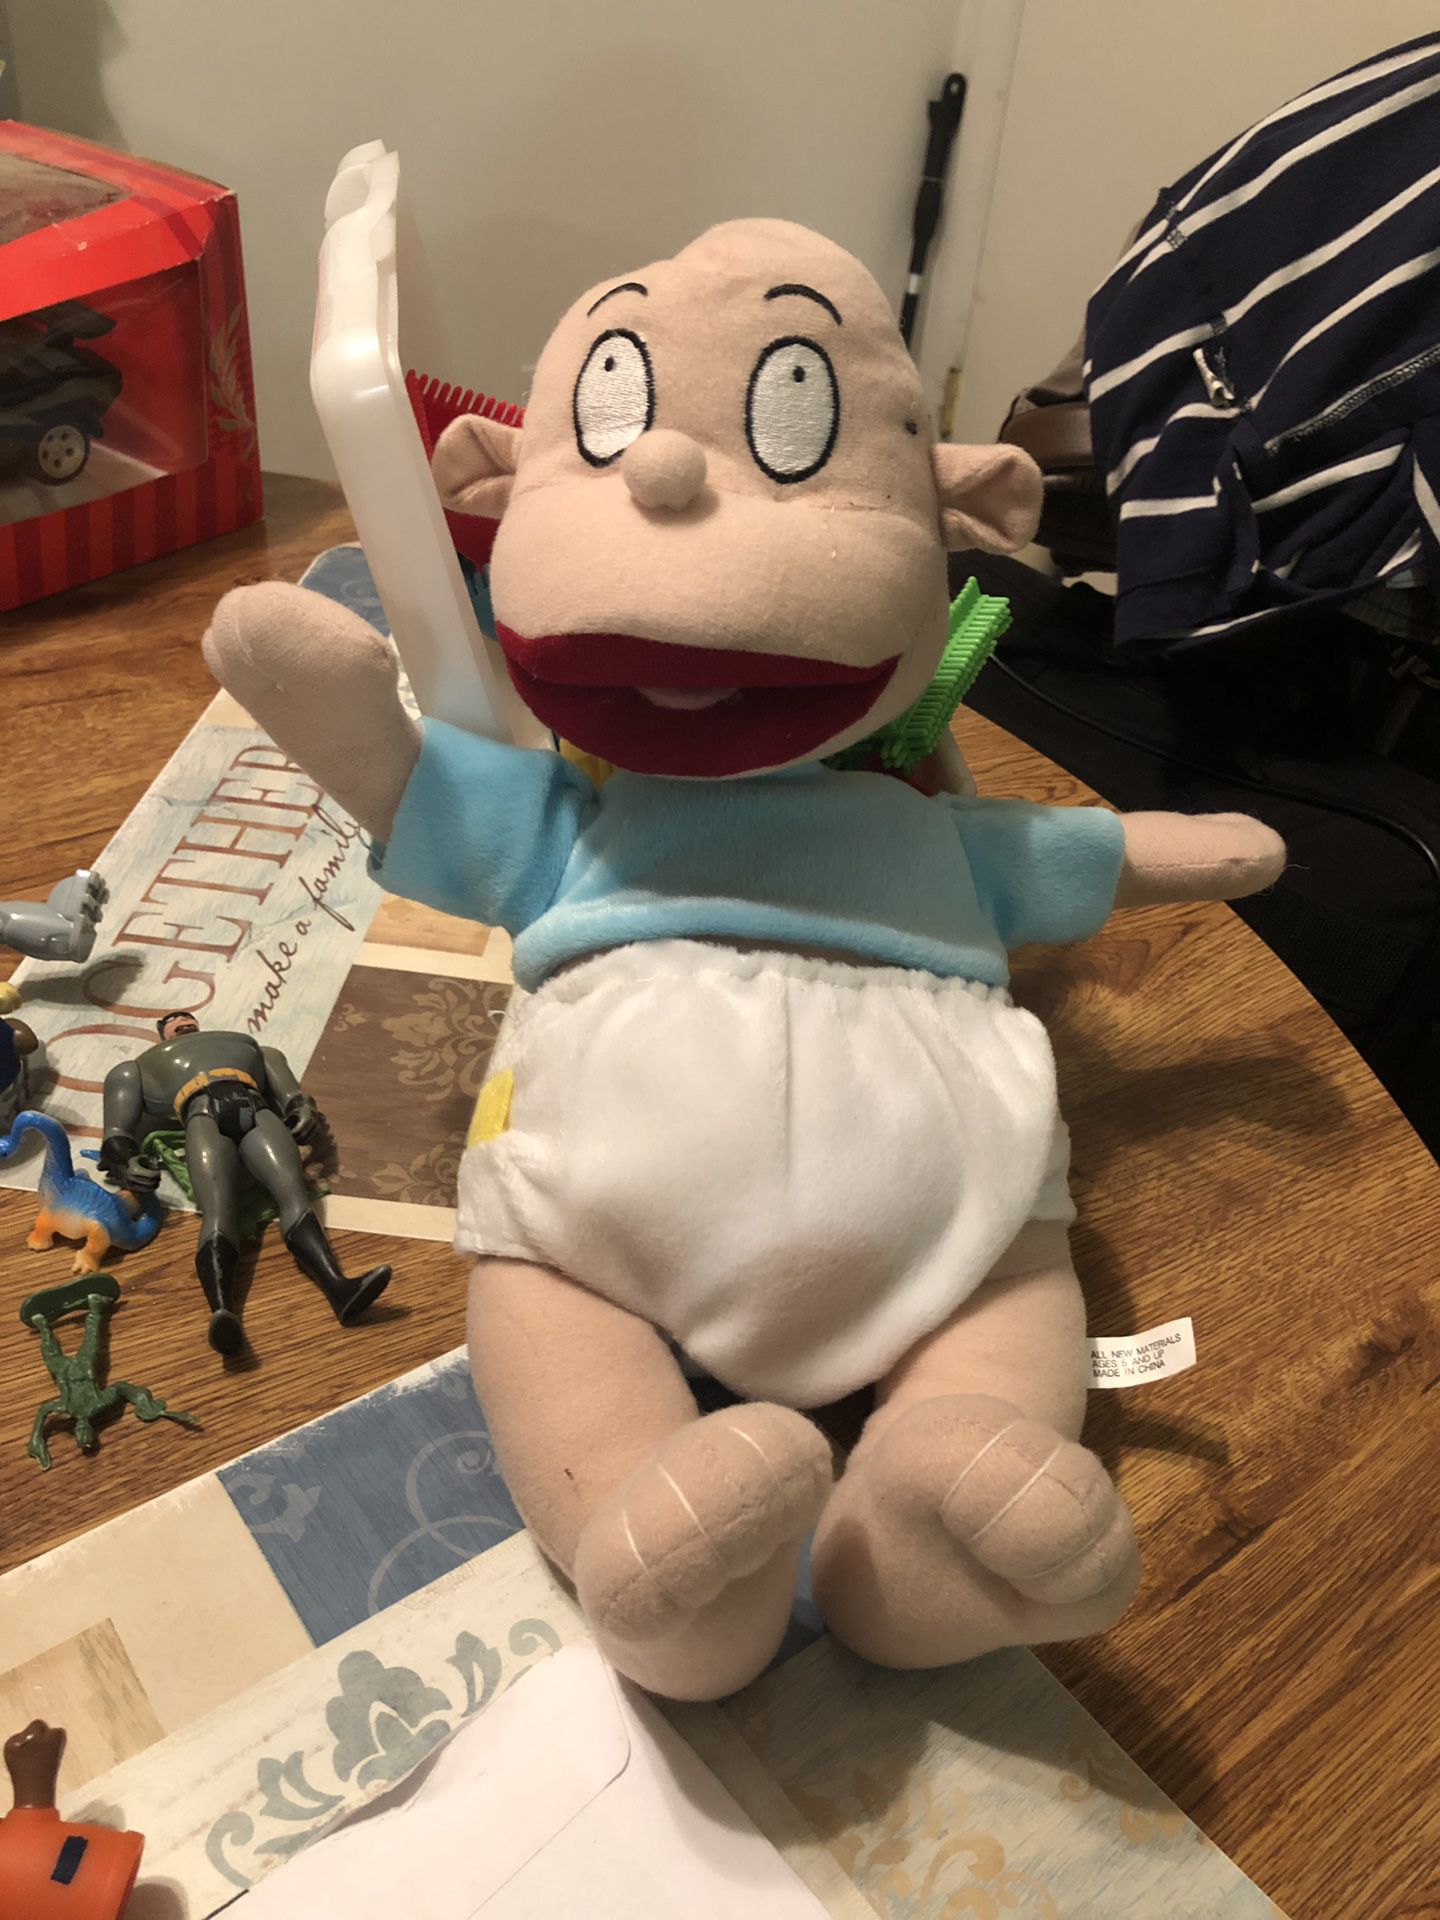 Plush RUGRATS "Tommy Pickles" Doll